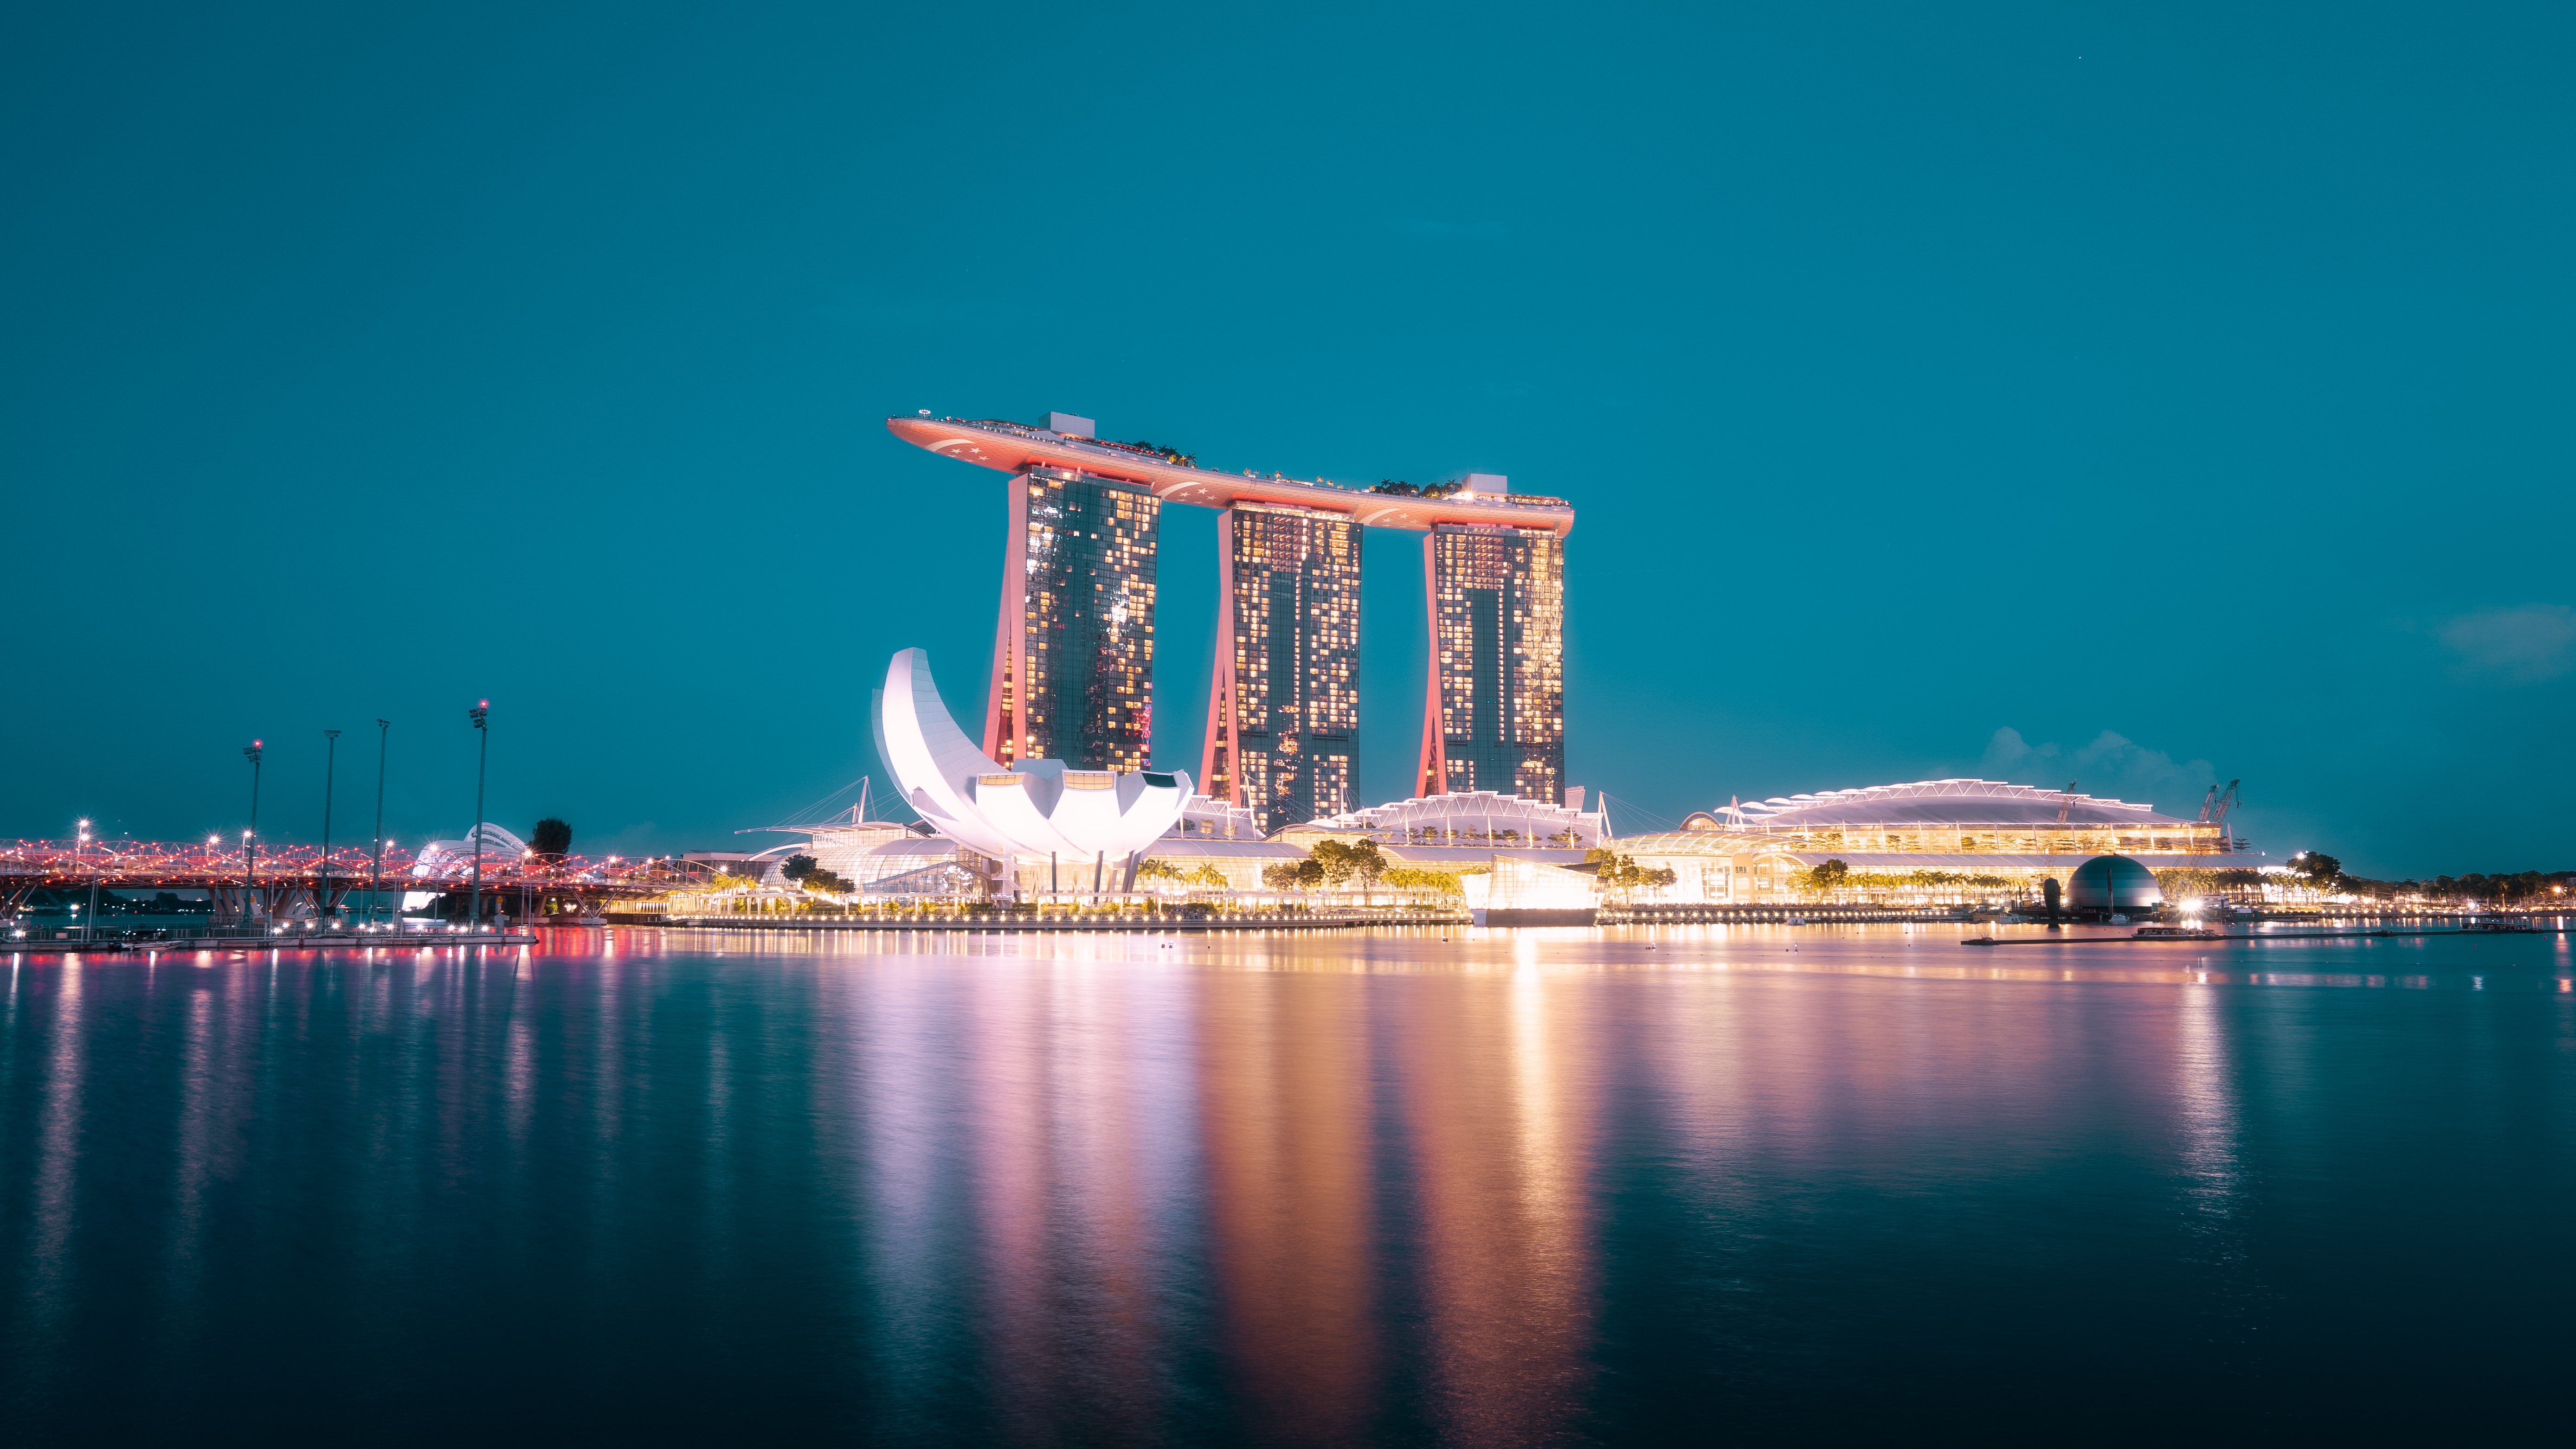 Marina Bay Sands Wallpaper 4K, Hotel, Singapore, World/Search Results, #2847